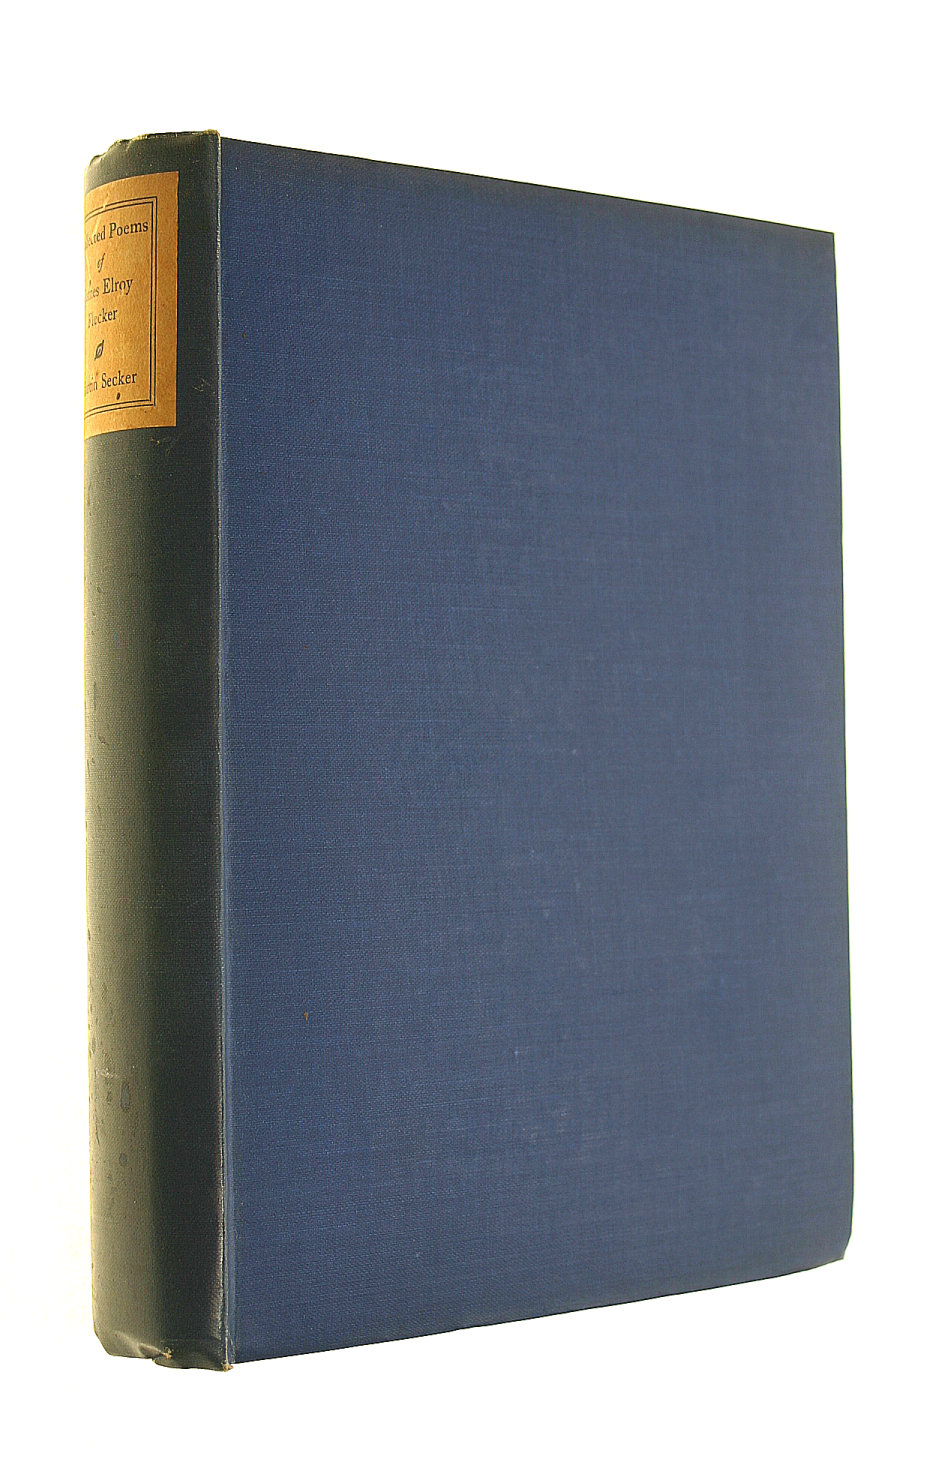 JAMES ELROY FLECKER. EDITED, WITH AN INTRODUCTION, BY SIR JOHN SQUIRE - Collected Poems of James Elroy Flecker